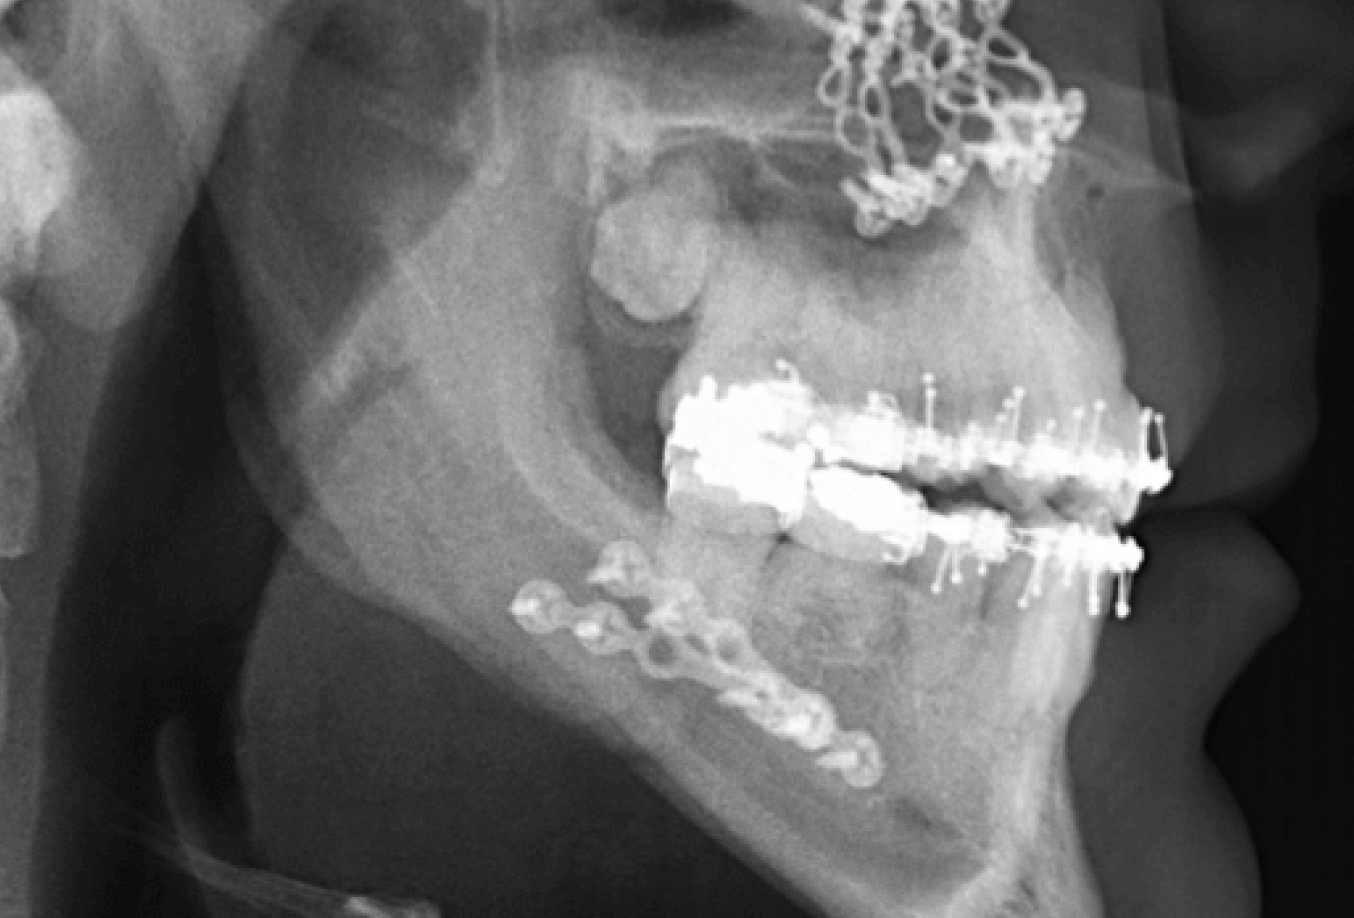 X-ray of human jaw and teeth